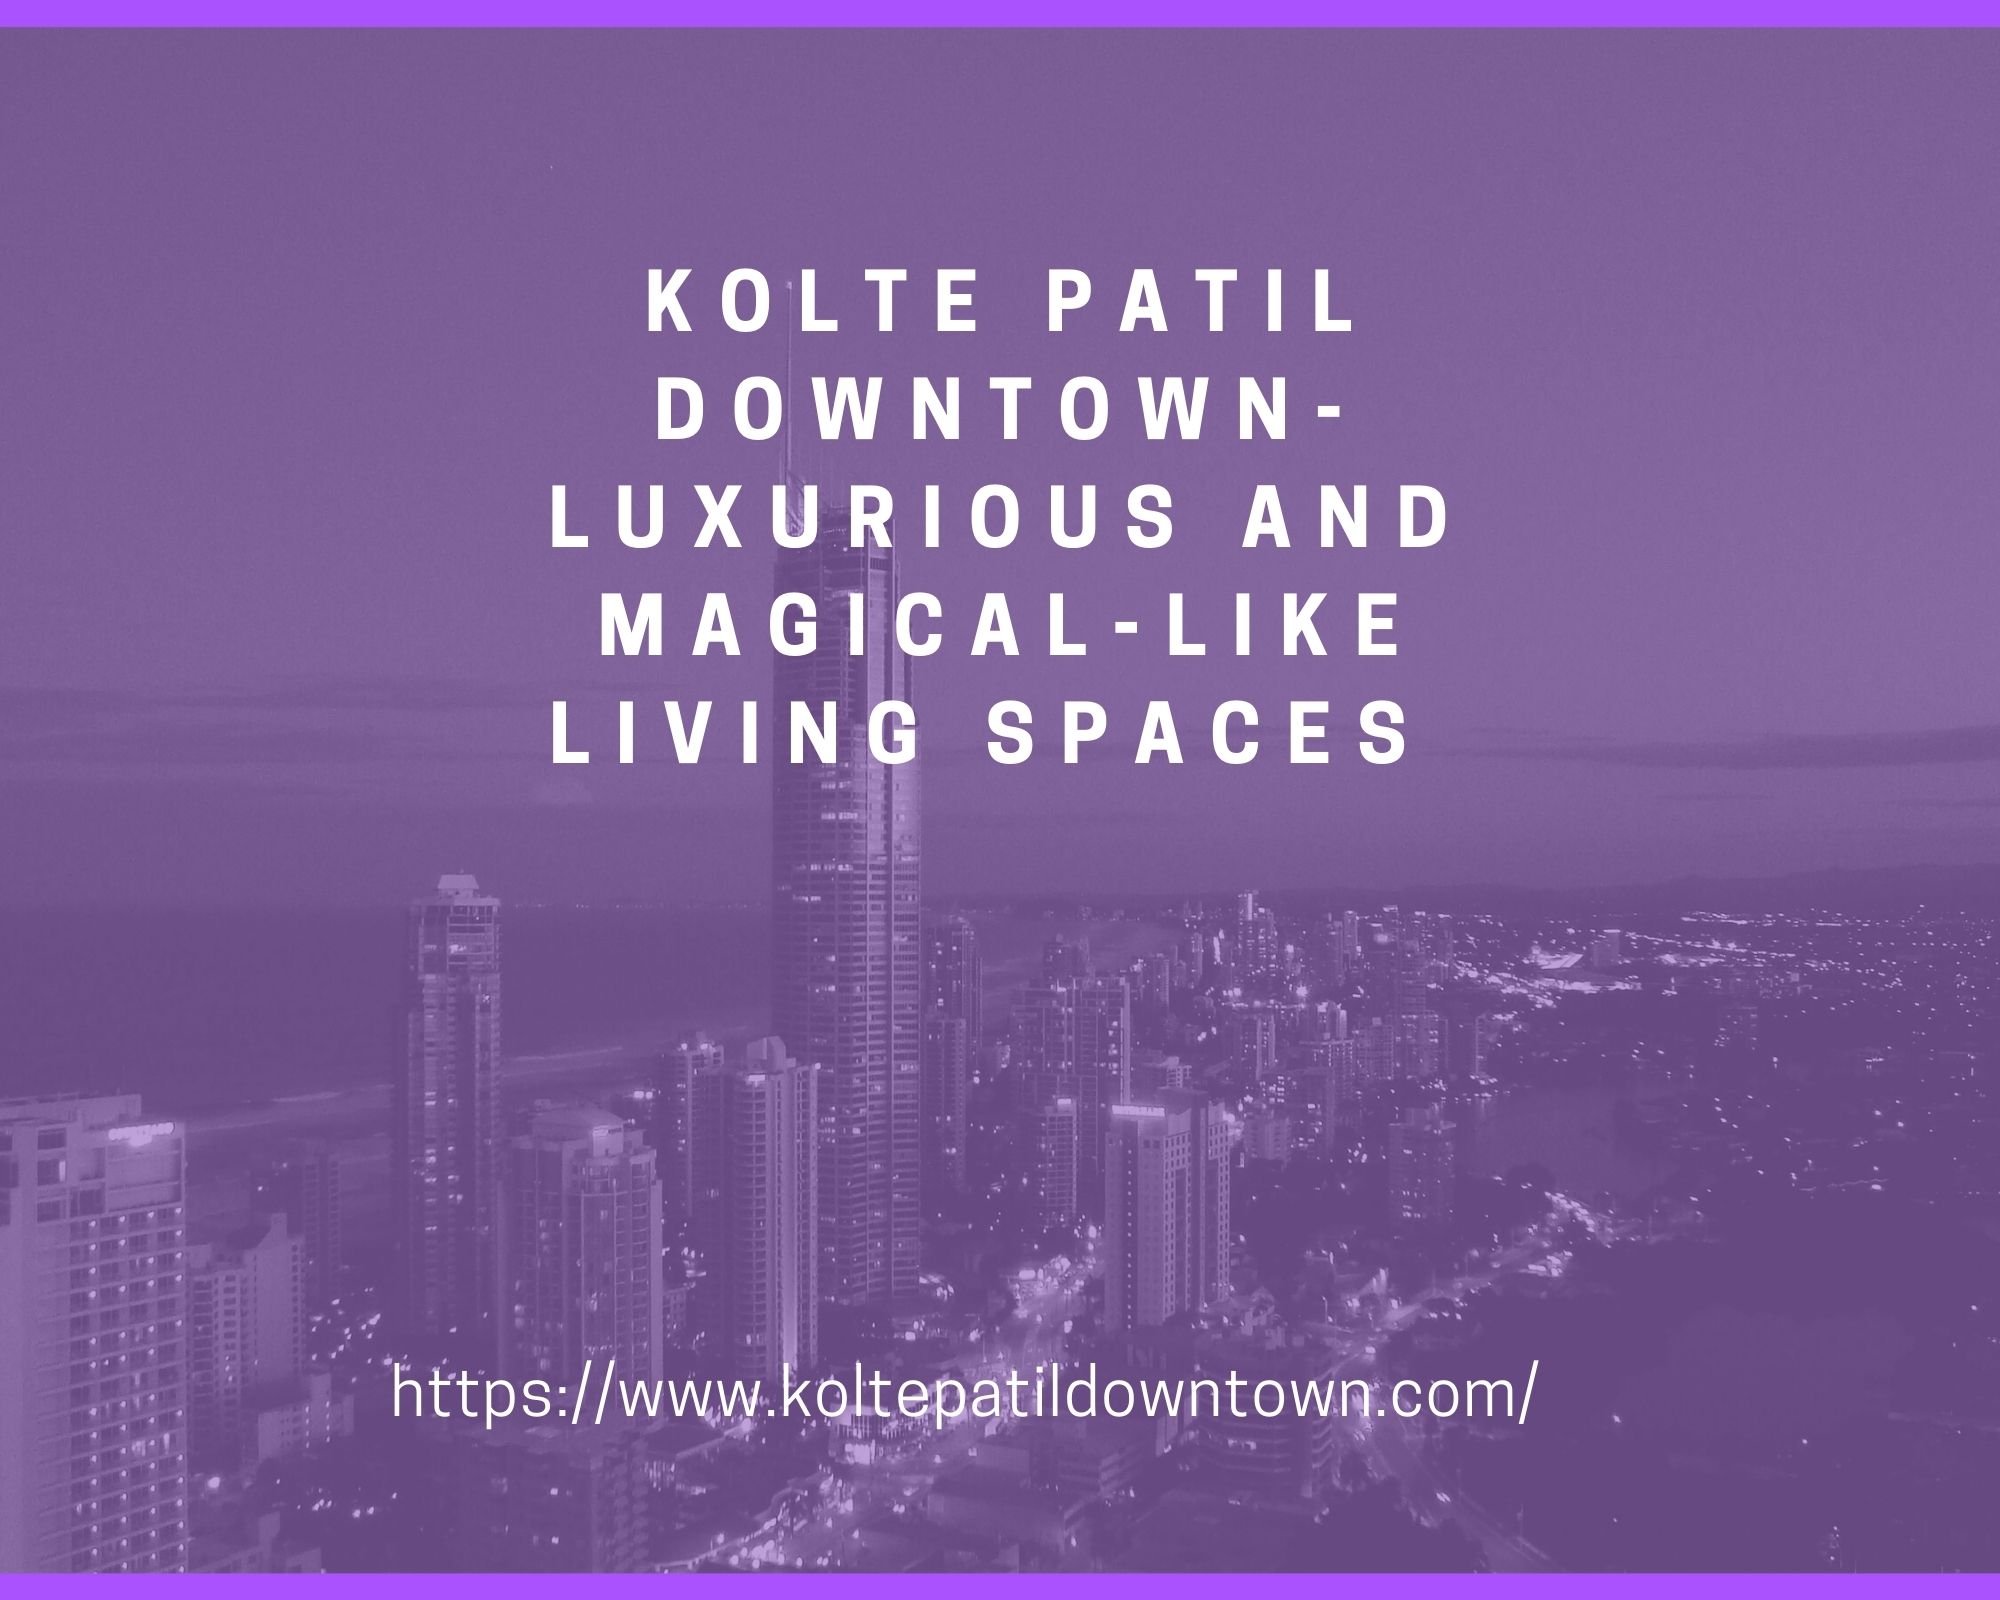 Kolte Patil Downtown- Luxurious And Magical-Like Living Spaces